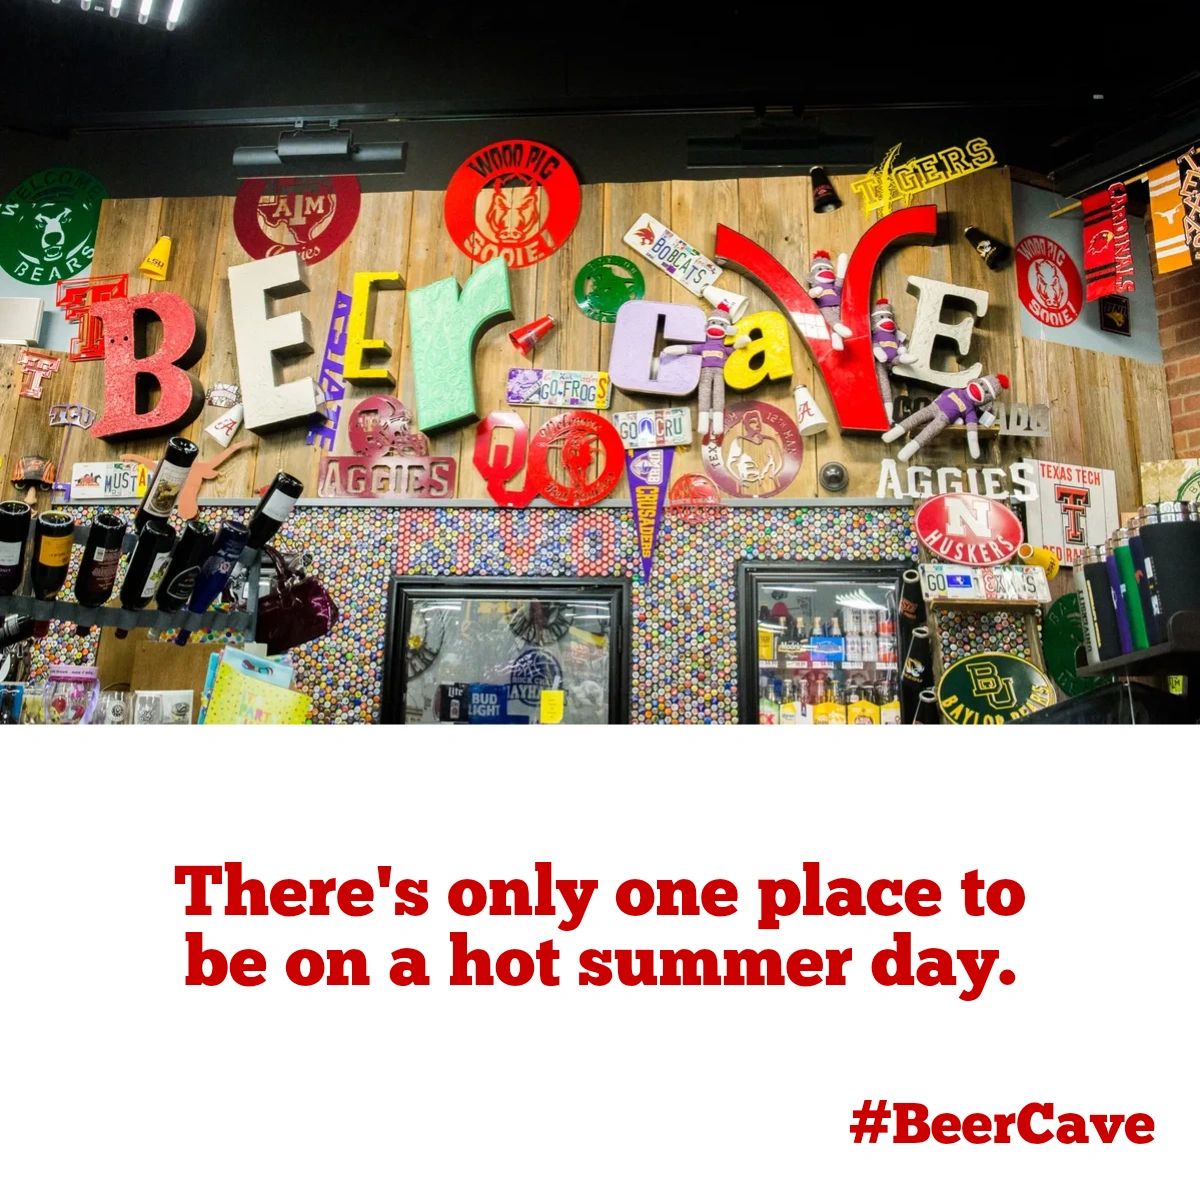 Calling all beer enthusiasts: What's your go-to brew for a hot Texas afternoon? Comment with your top pick and come try our refreshing selection from the beer cave. 🍻 #czechoutourbeercave #czechoutslovaceks #slovacekswest #beerloversunite #thirstyintexas #drinklocal #beercave